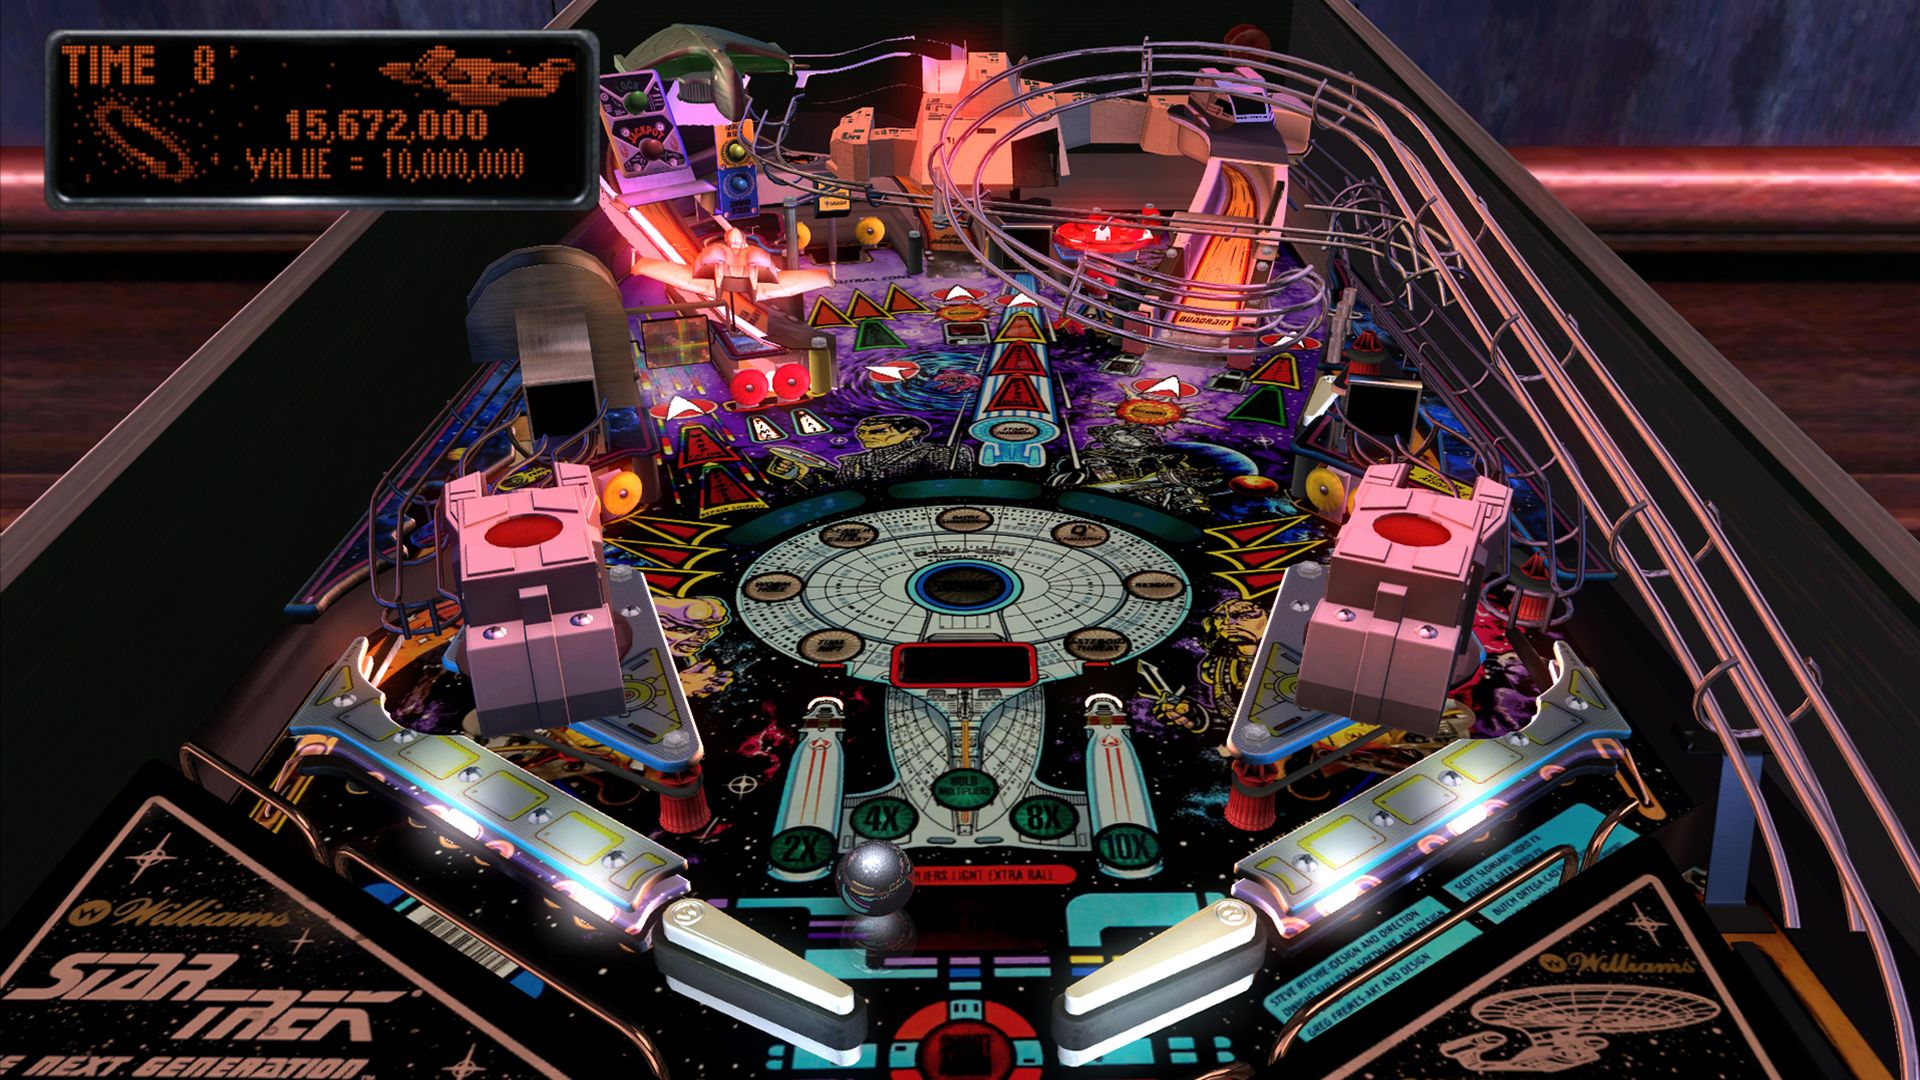 3d pinball game free download for windows 7